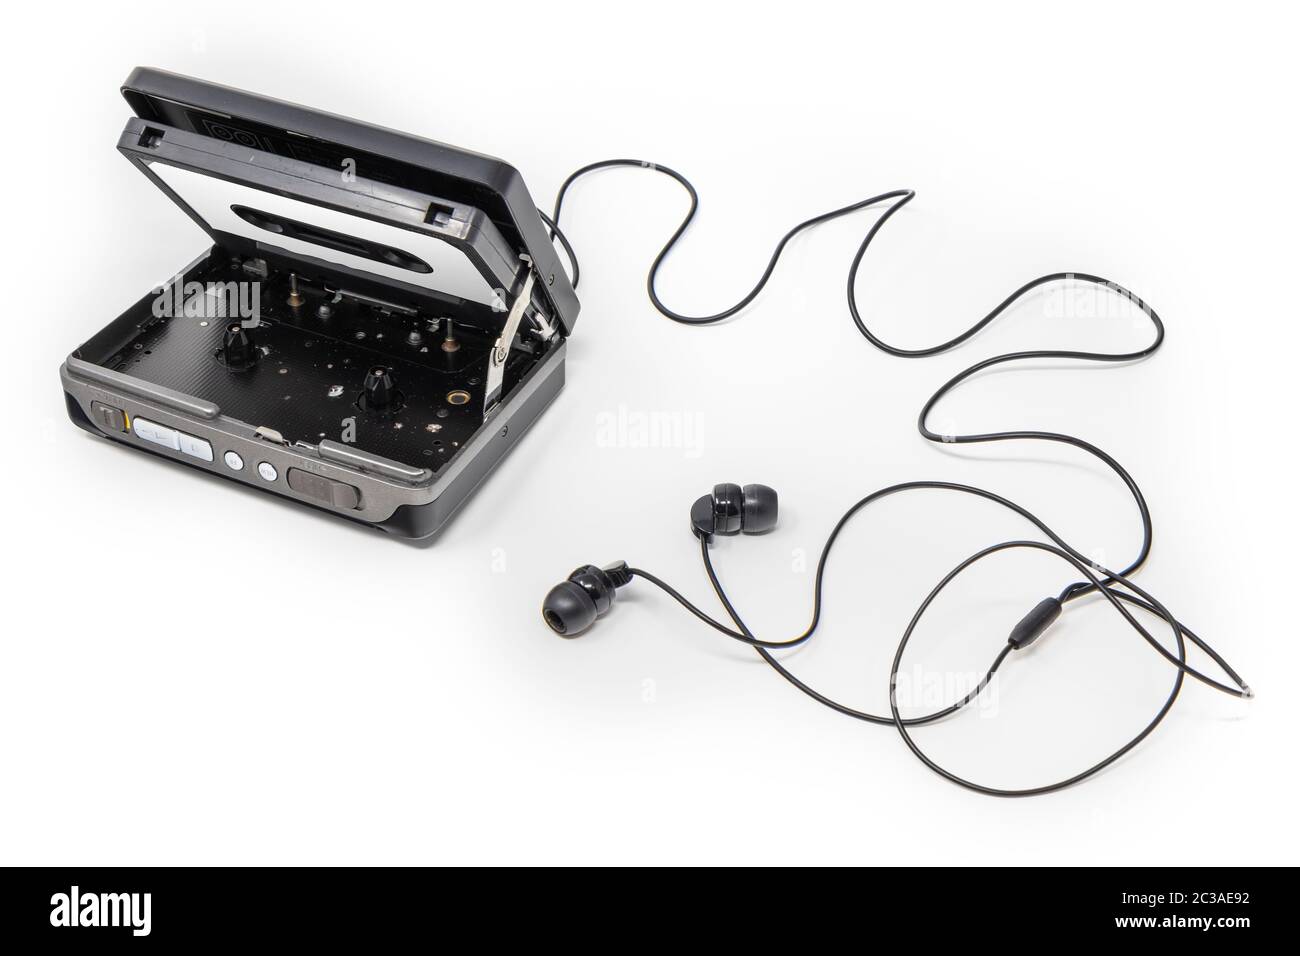 Vintage audio player. Old fashioned portable cassette player, cult object, icon and symbol of the 80s and 90s. Headphones isolated on white background Stock Photo